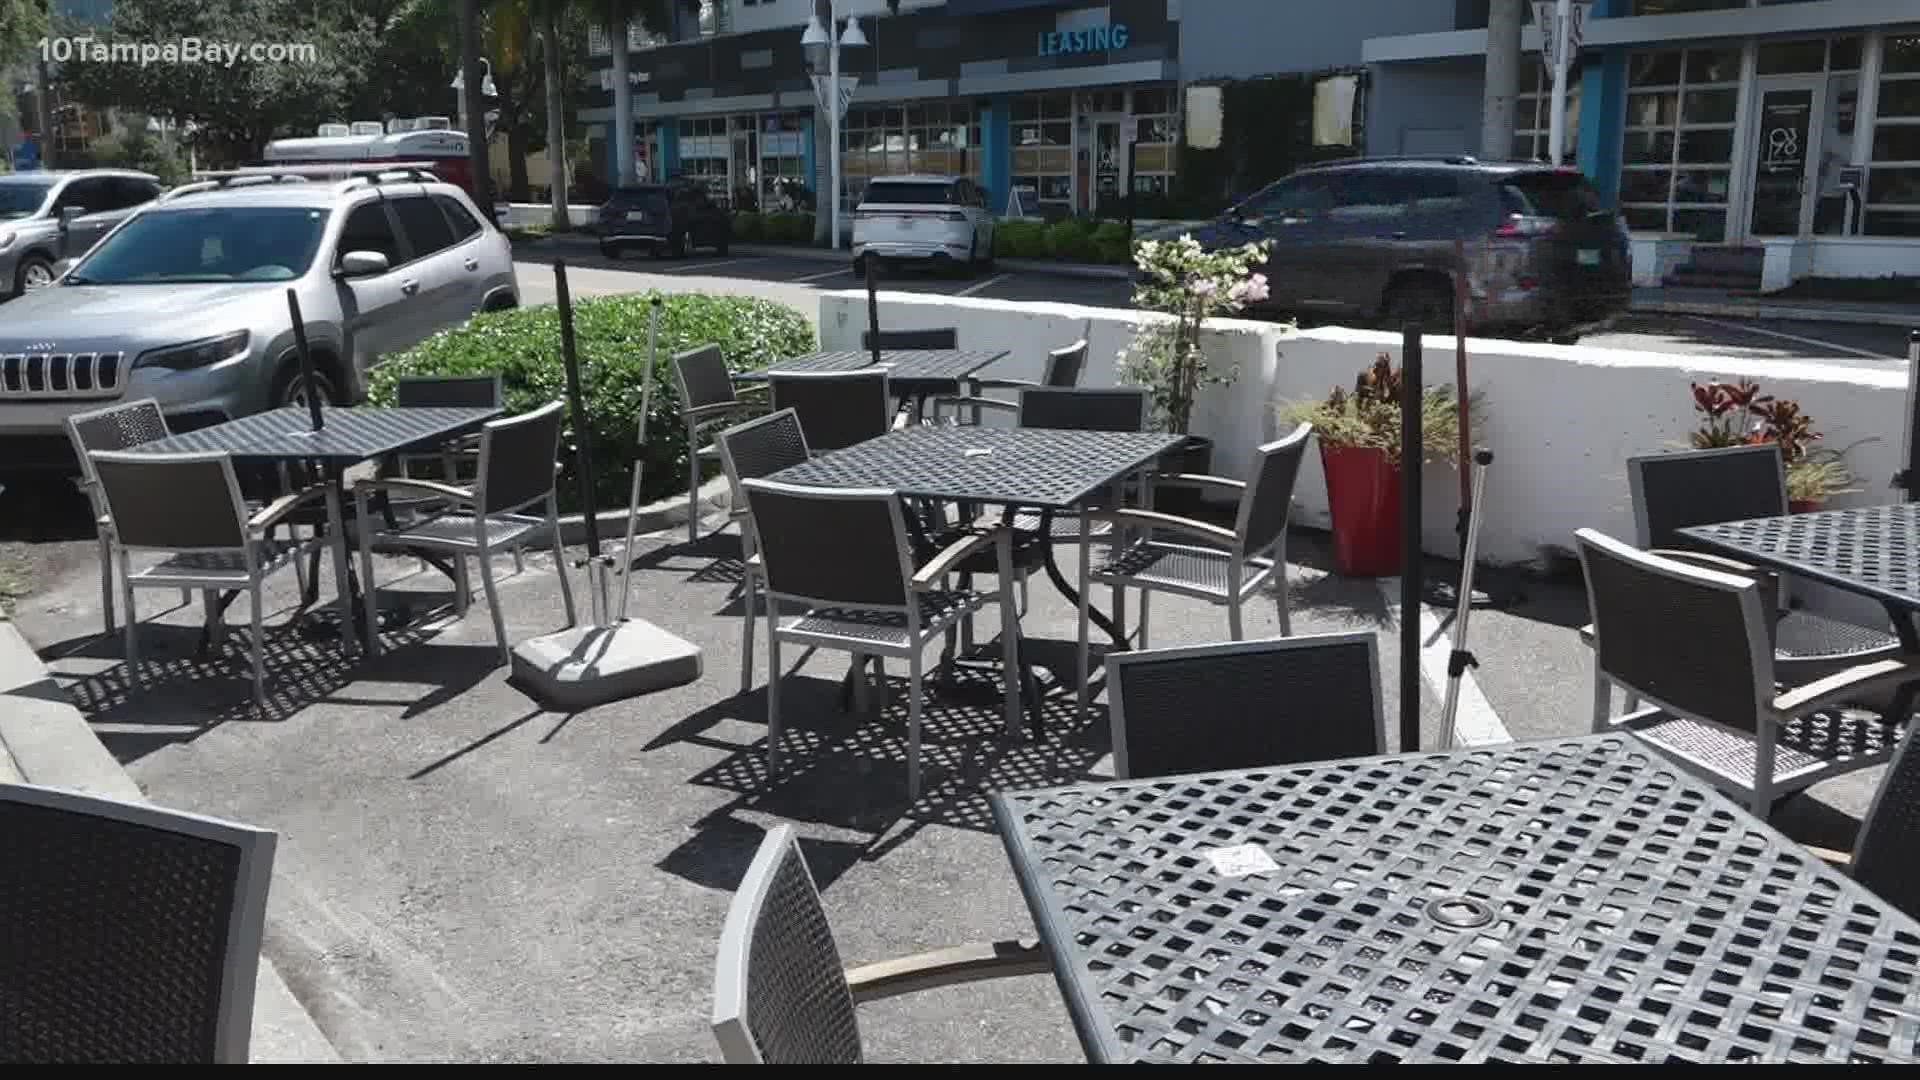 The parklets, tables set-up behind concrete barriers, were a temporary solution created earlier in the pandemic.